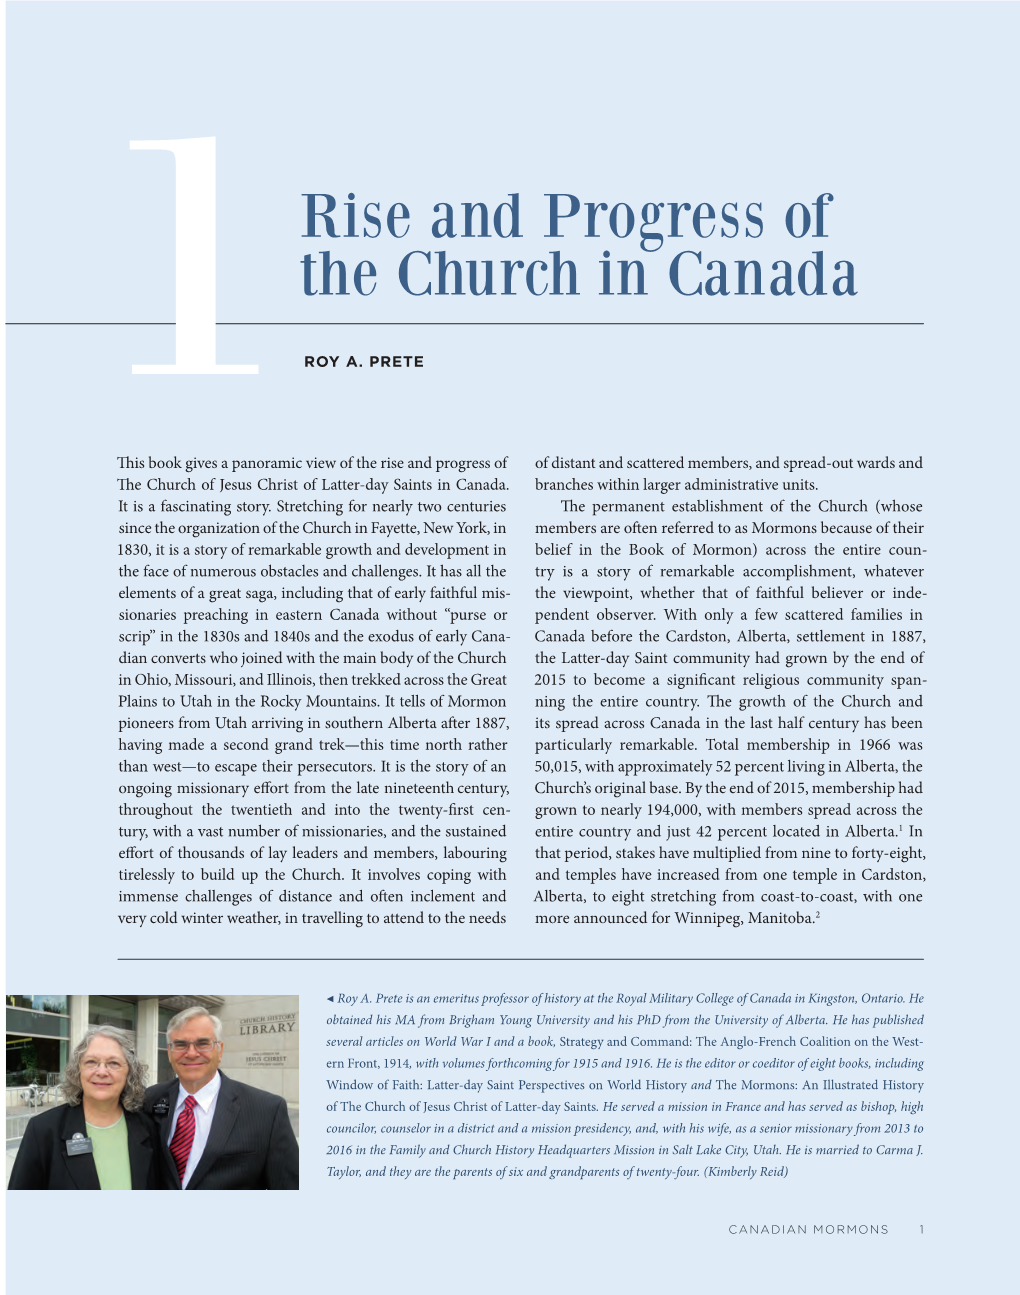 1Rise and Progress of the Church in Canada